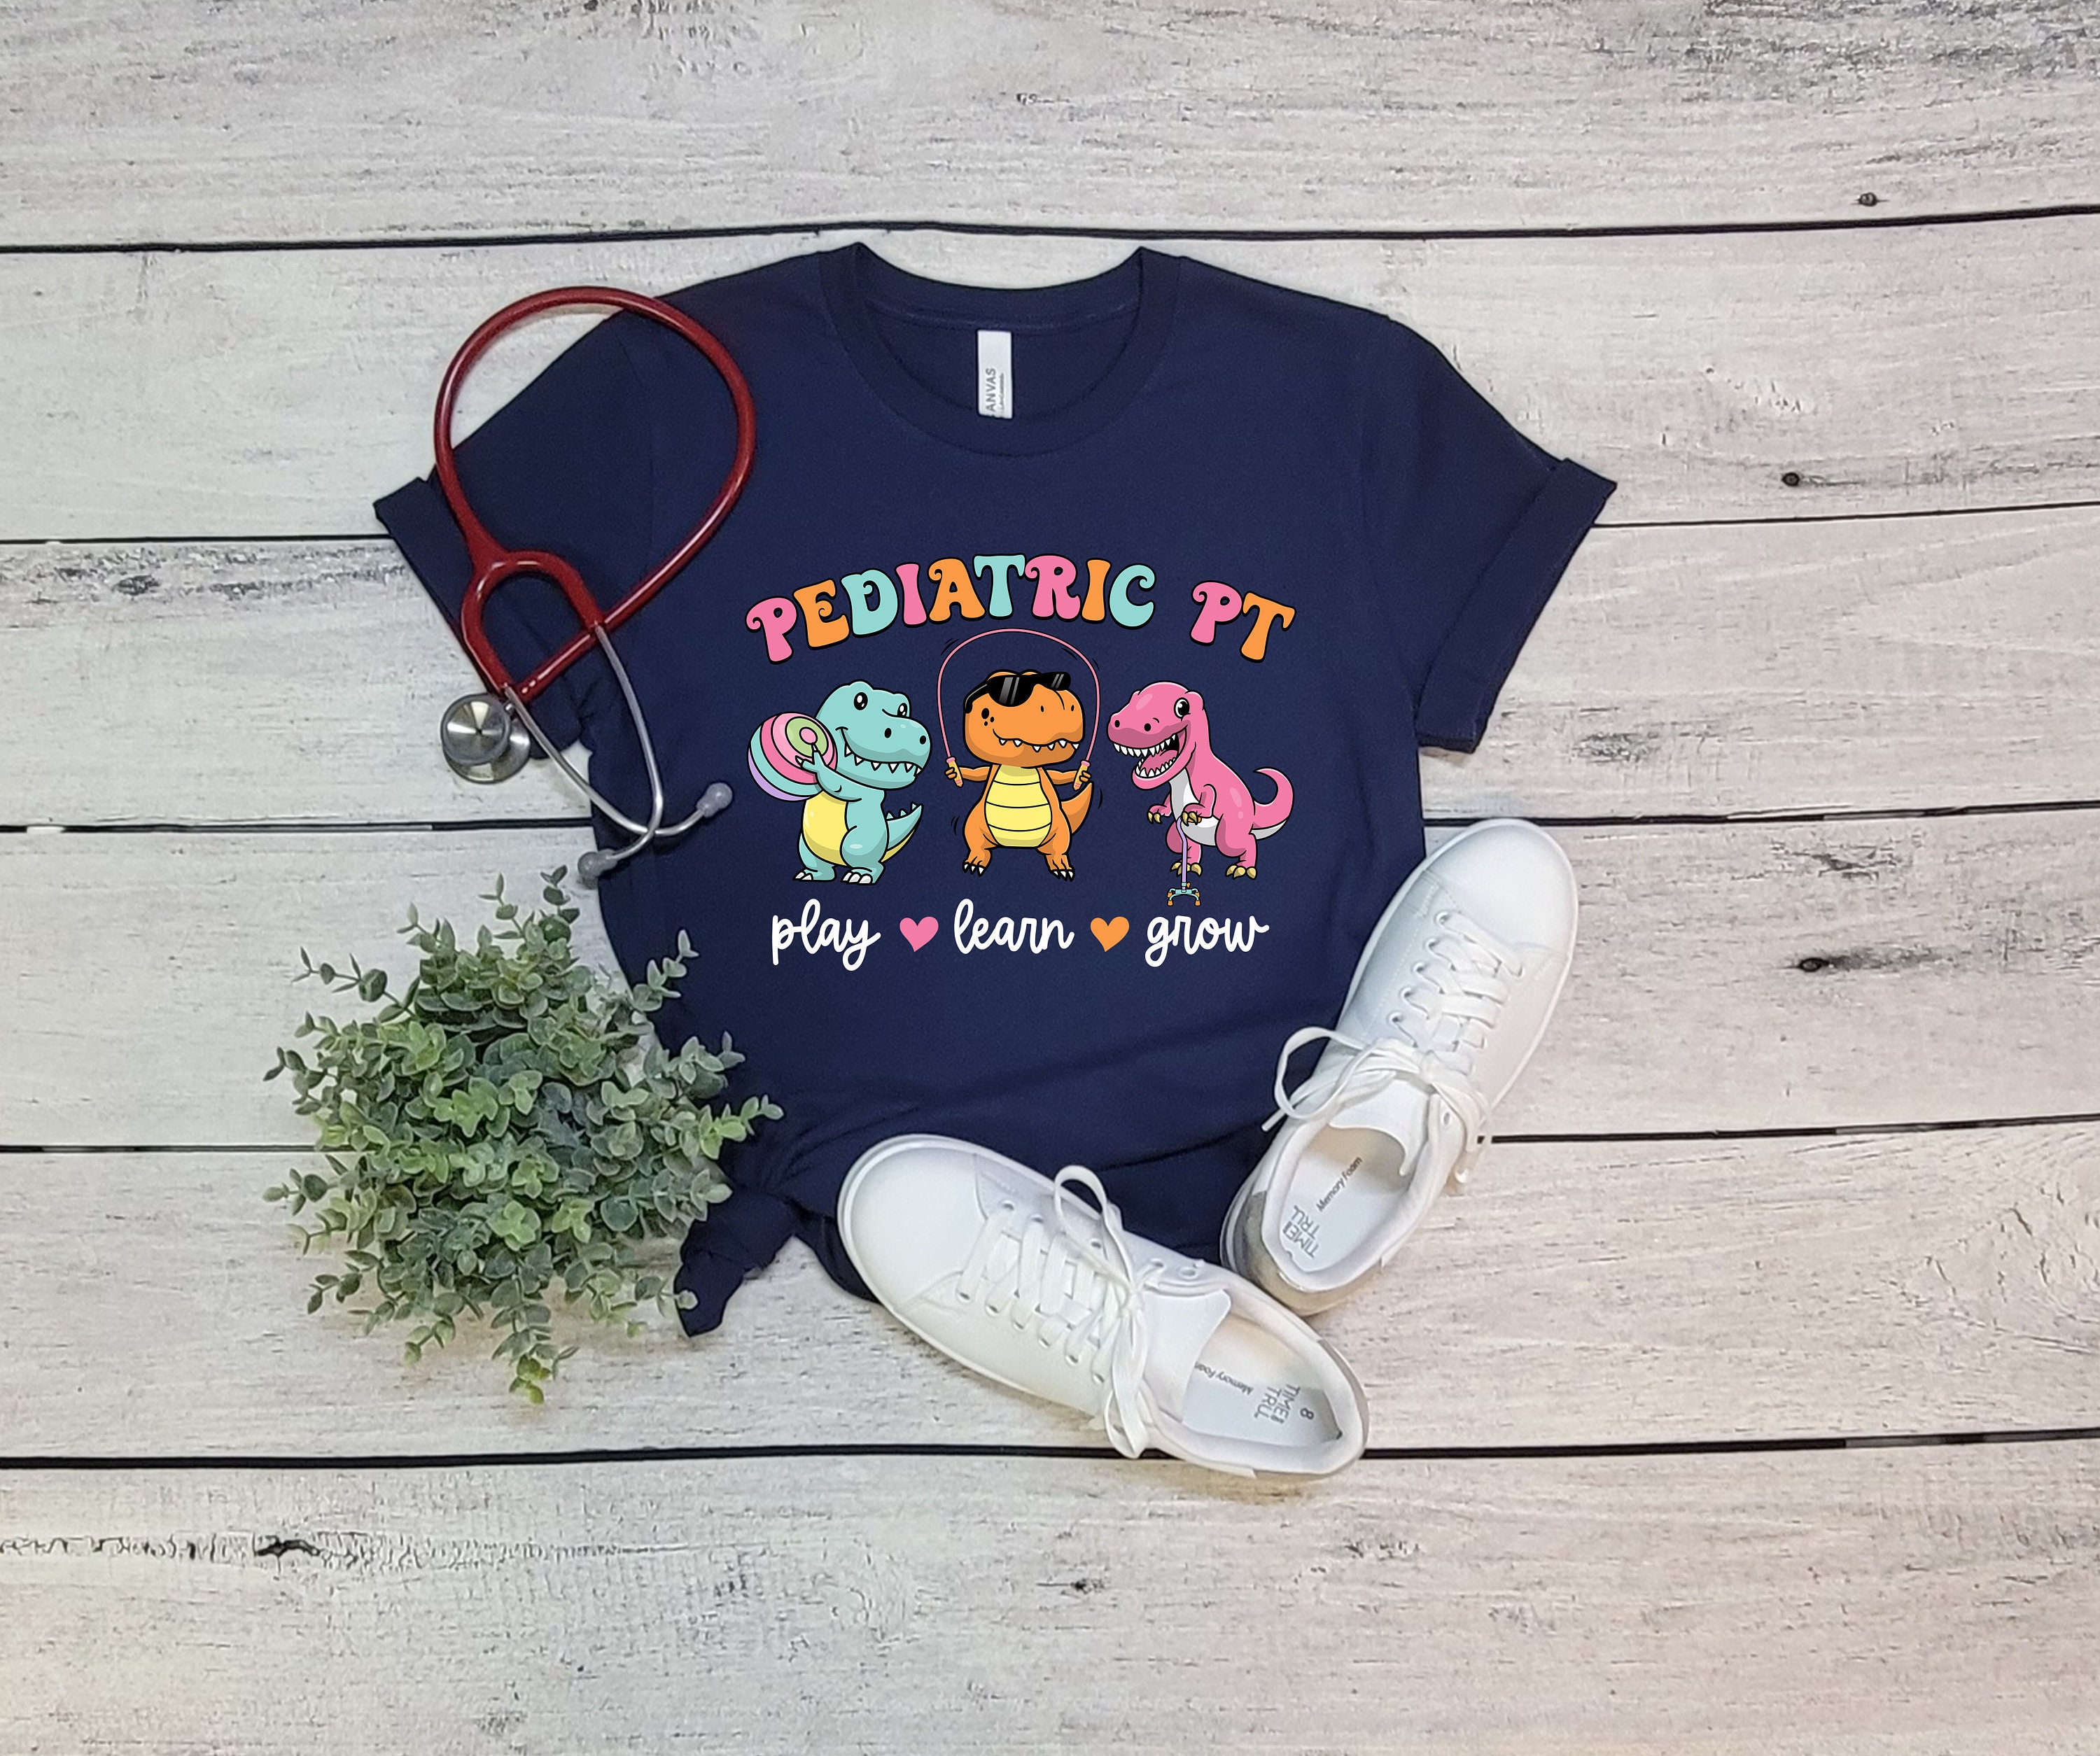 Discover Pediatric Physical Therapy, Pediatric PT Shirt, Ot Shirt, Therapy Shirt, Therapist Shirt, Occupational Outfit, Pediatric T-Shirt,